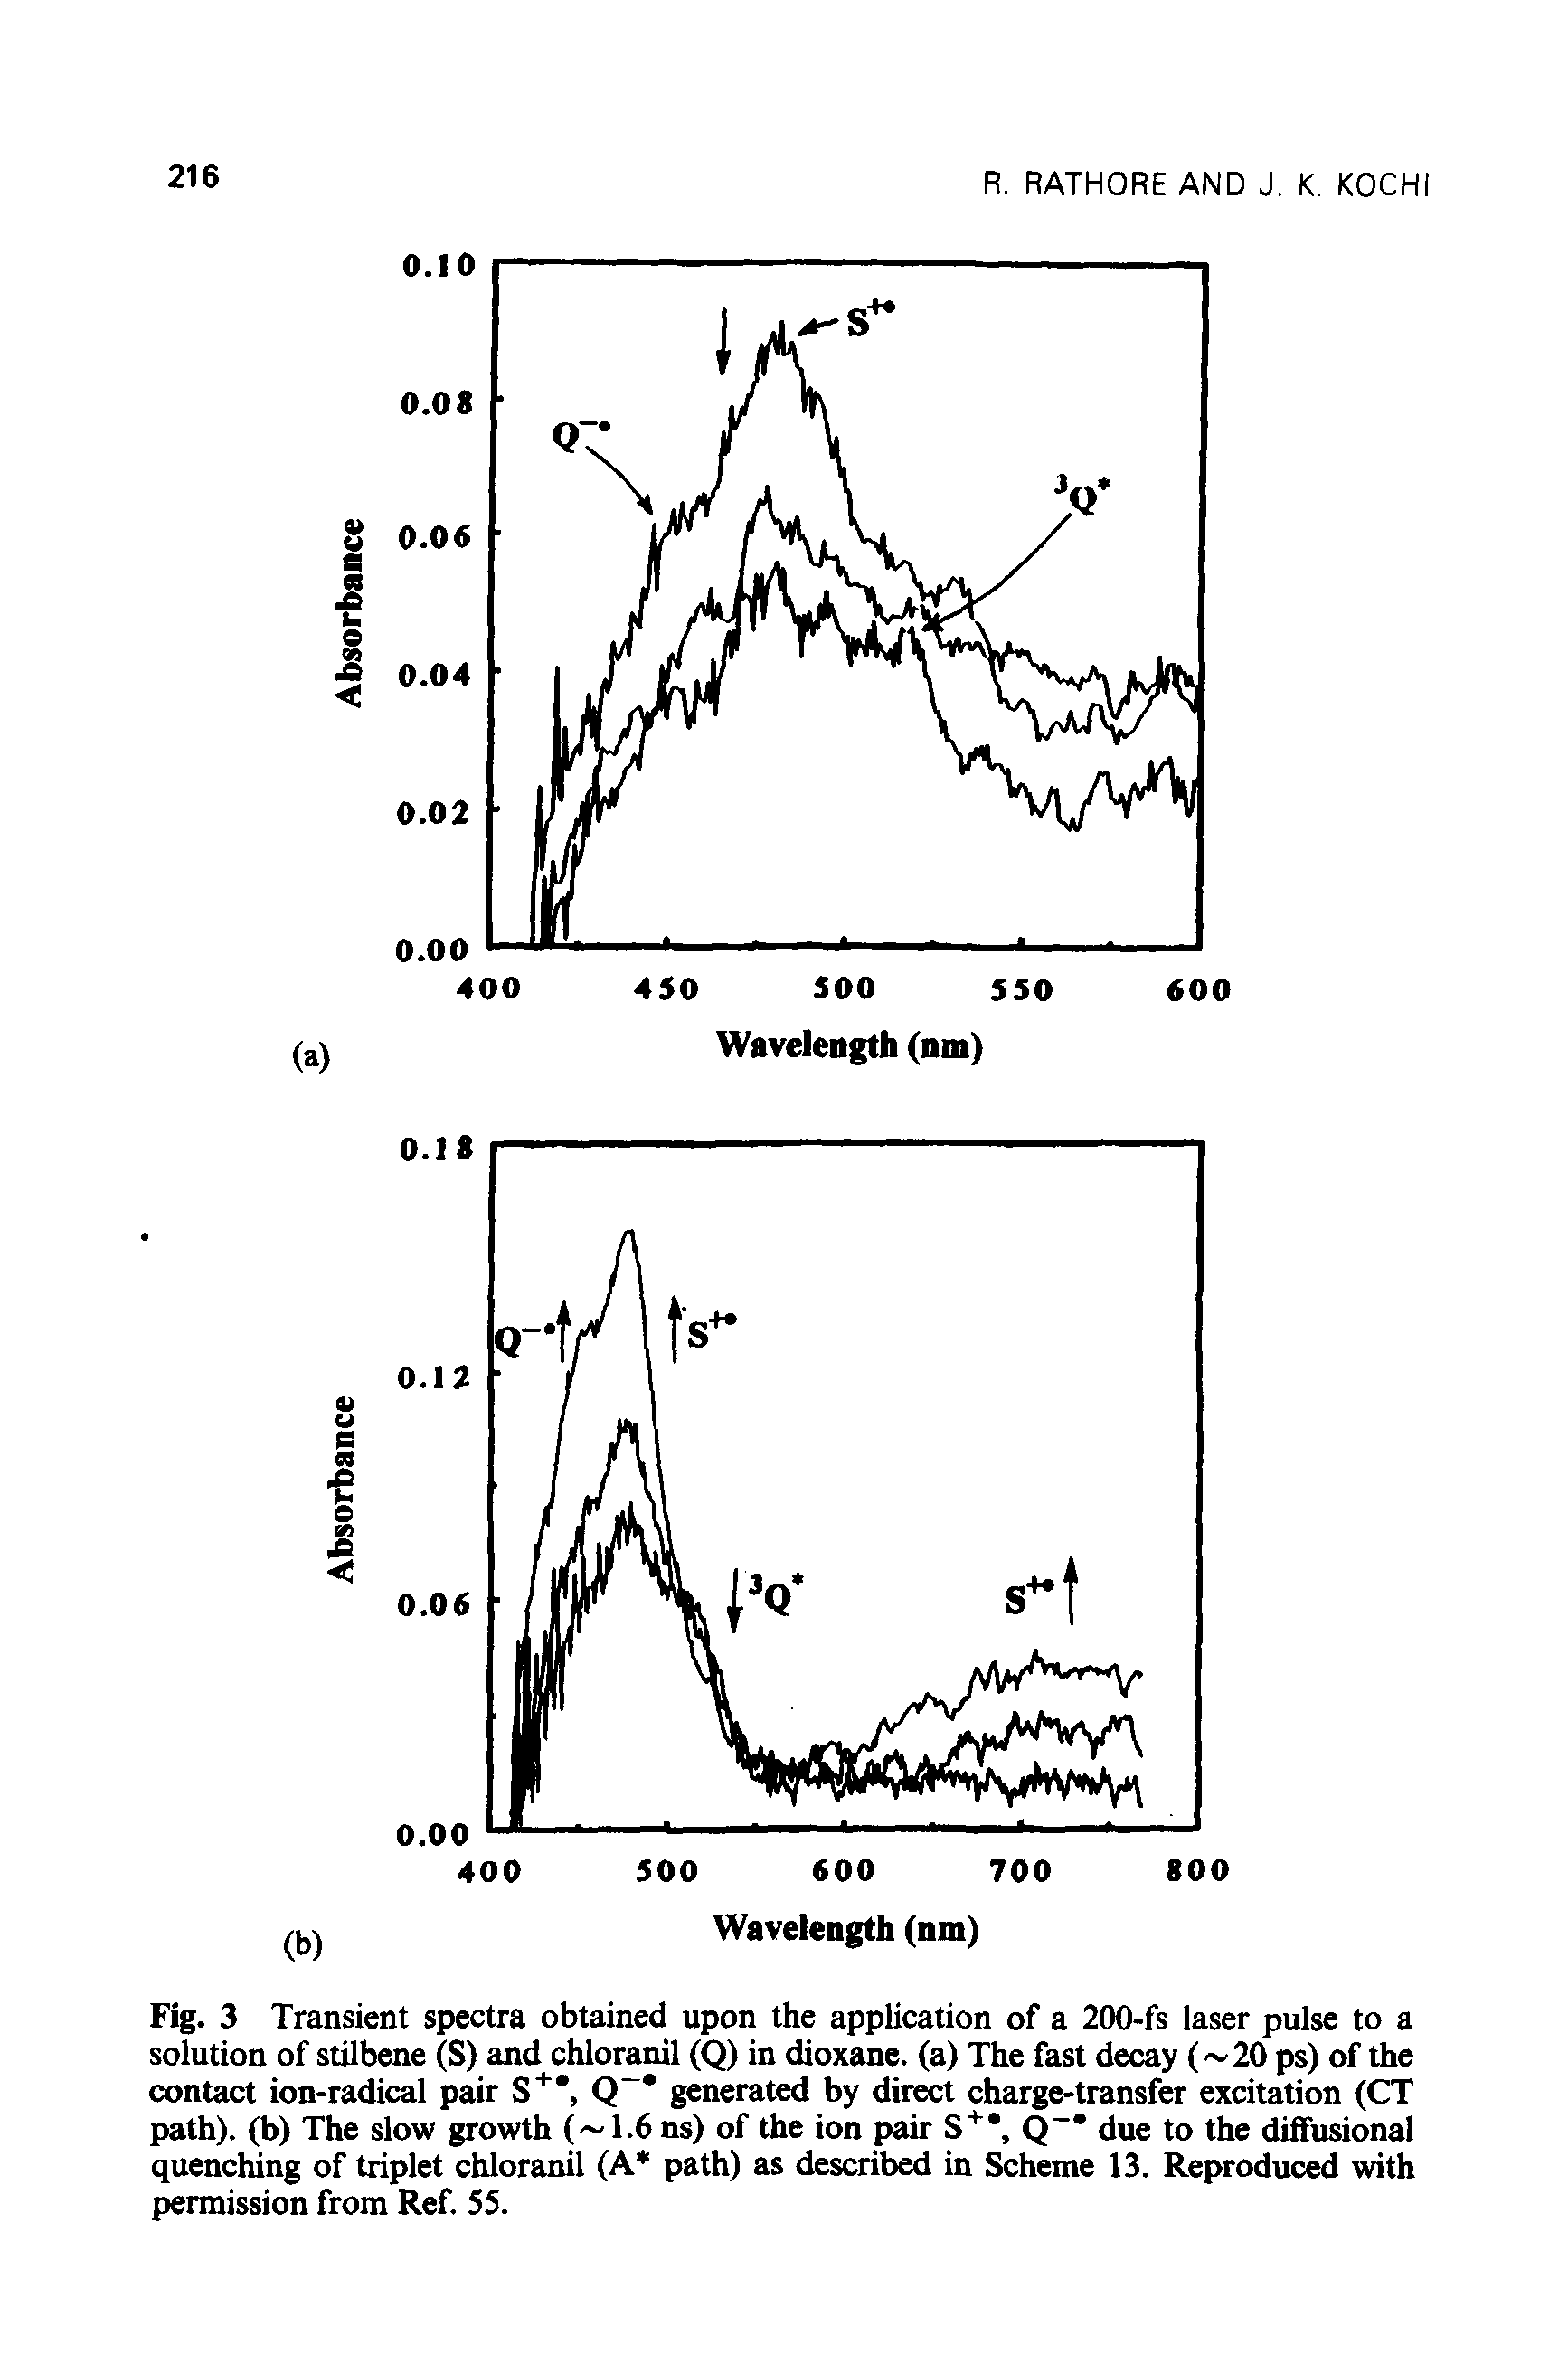 Fig. 3 Transient spectra obtained upon the application of a 200-fs laser pulse to a solution of stilbene (S) and chloranil (Q) in dioxane. (a) The fast decay ( 20 ps) of the contact ion-radical pair S+ , Q generated by direct charge-transfer excitation (CT path), (b) The slow growth ( 1.6 ns) of the ion pair S+ Q due to the diffusional quenching of triplet chloranil (A path) as described in Scheme 13. Reproduced with permission from Ref. 55.